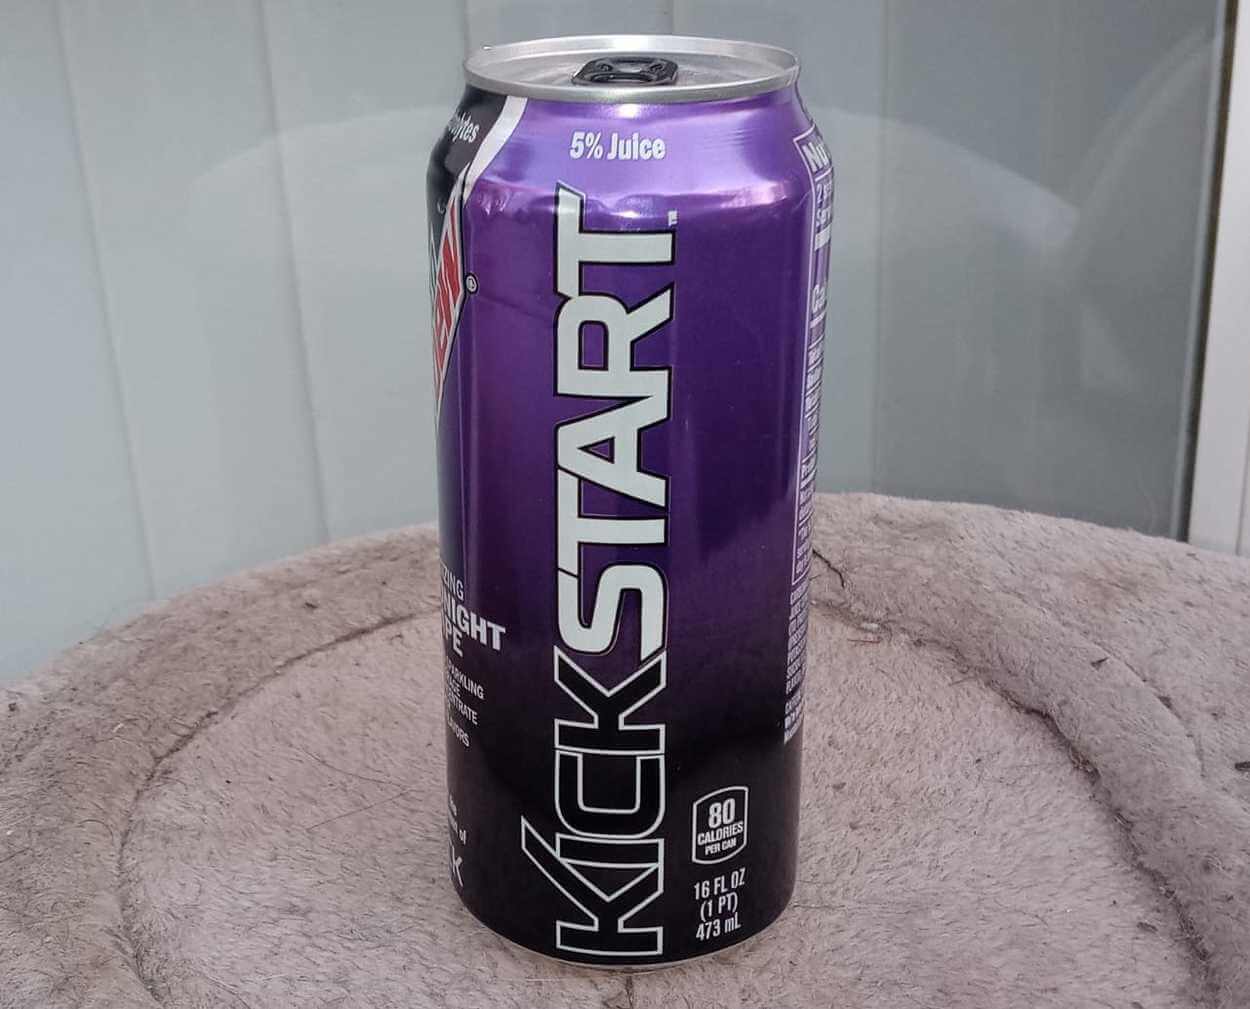 Mountain Dew Kickstart: Is It Safe for Daily Consumption?